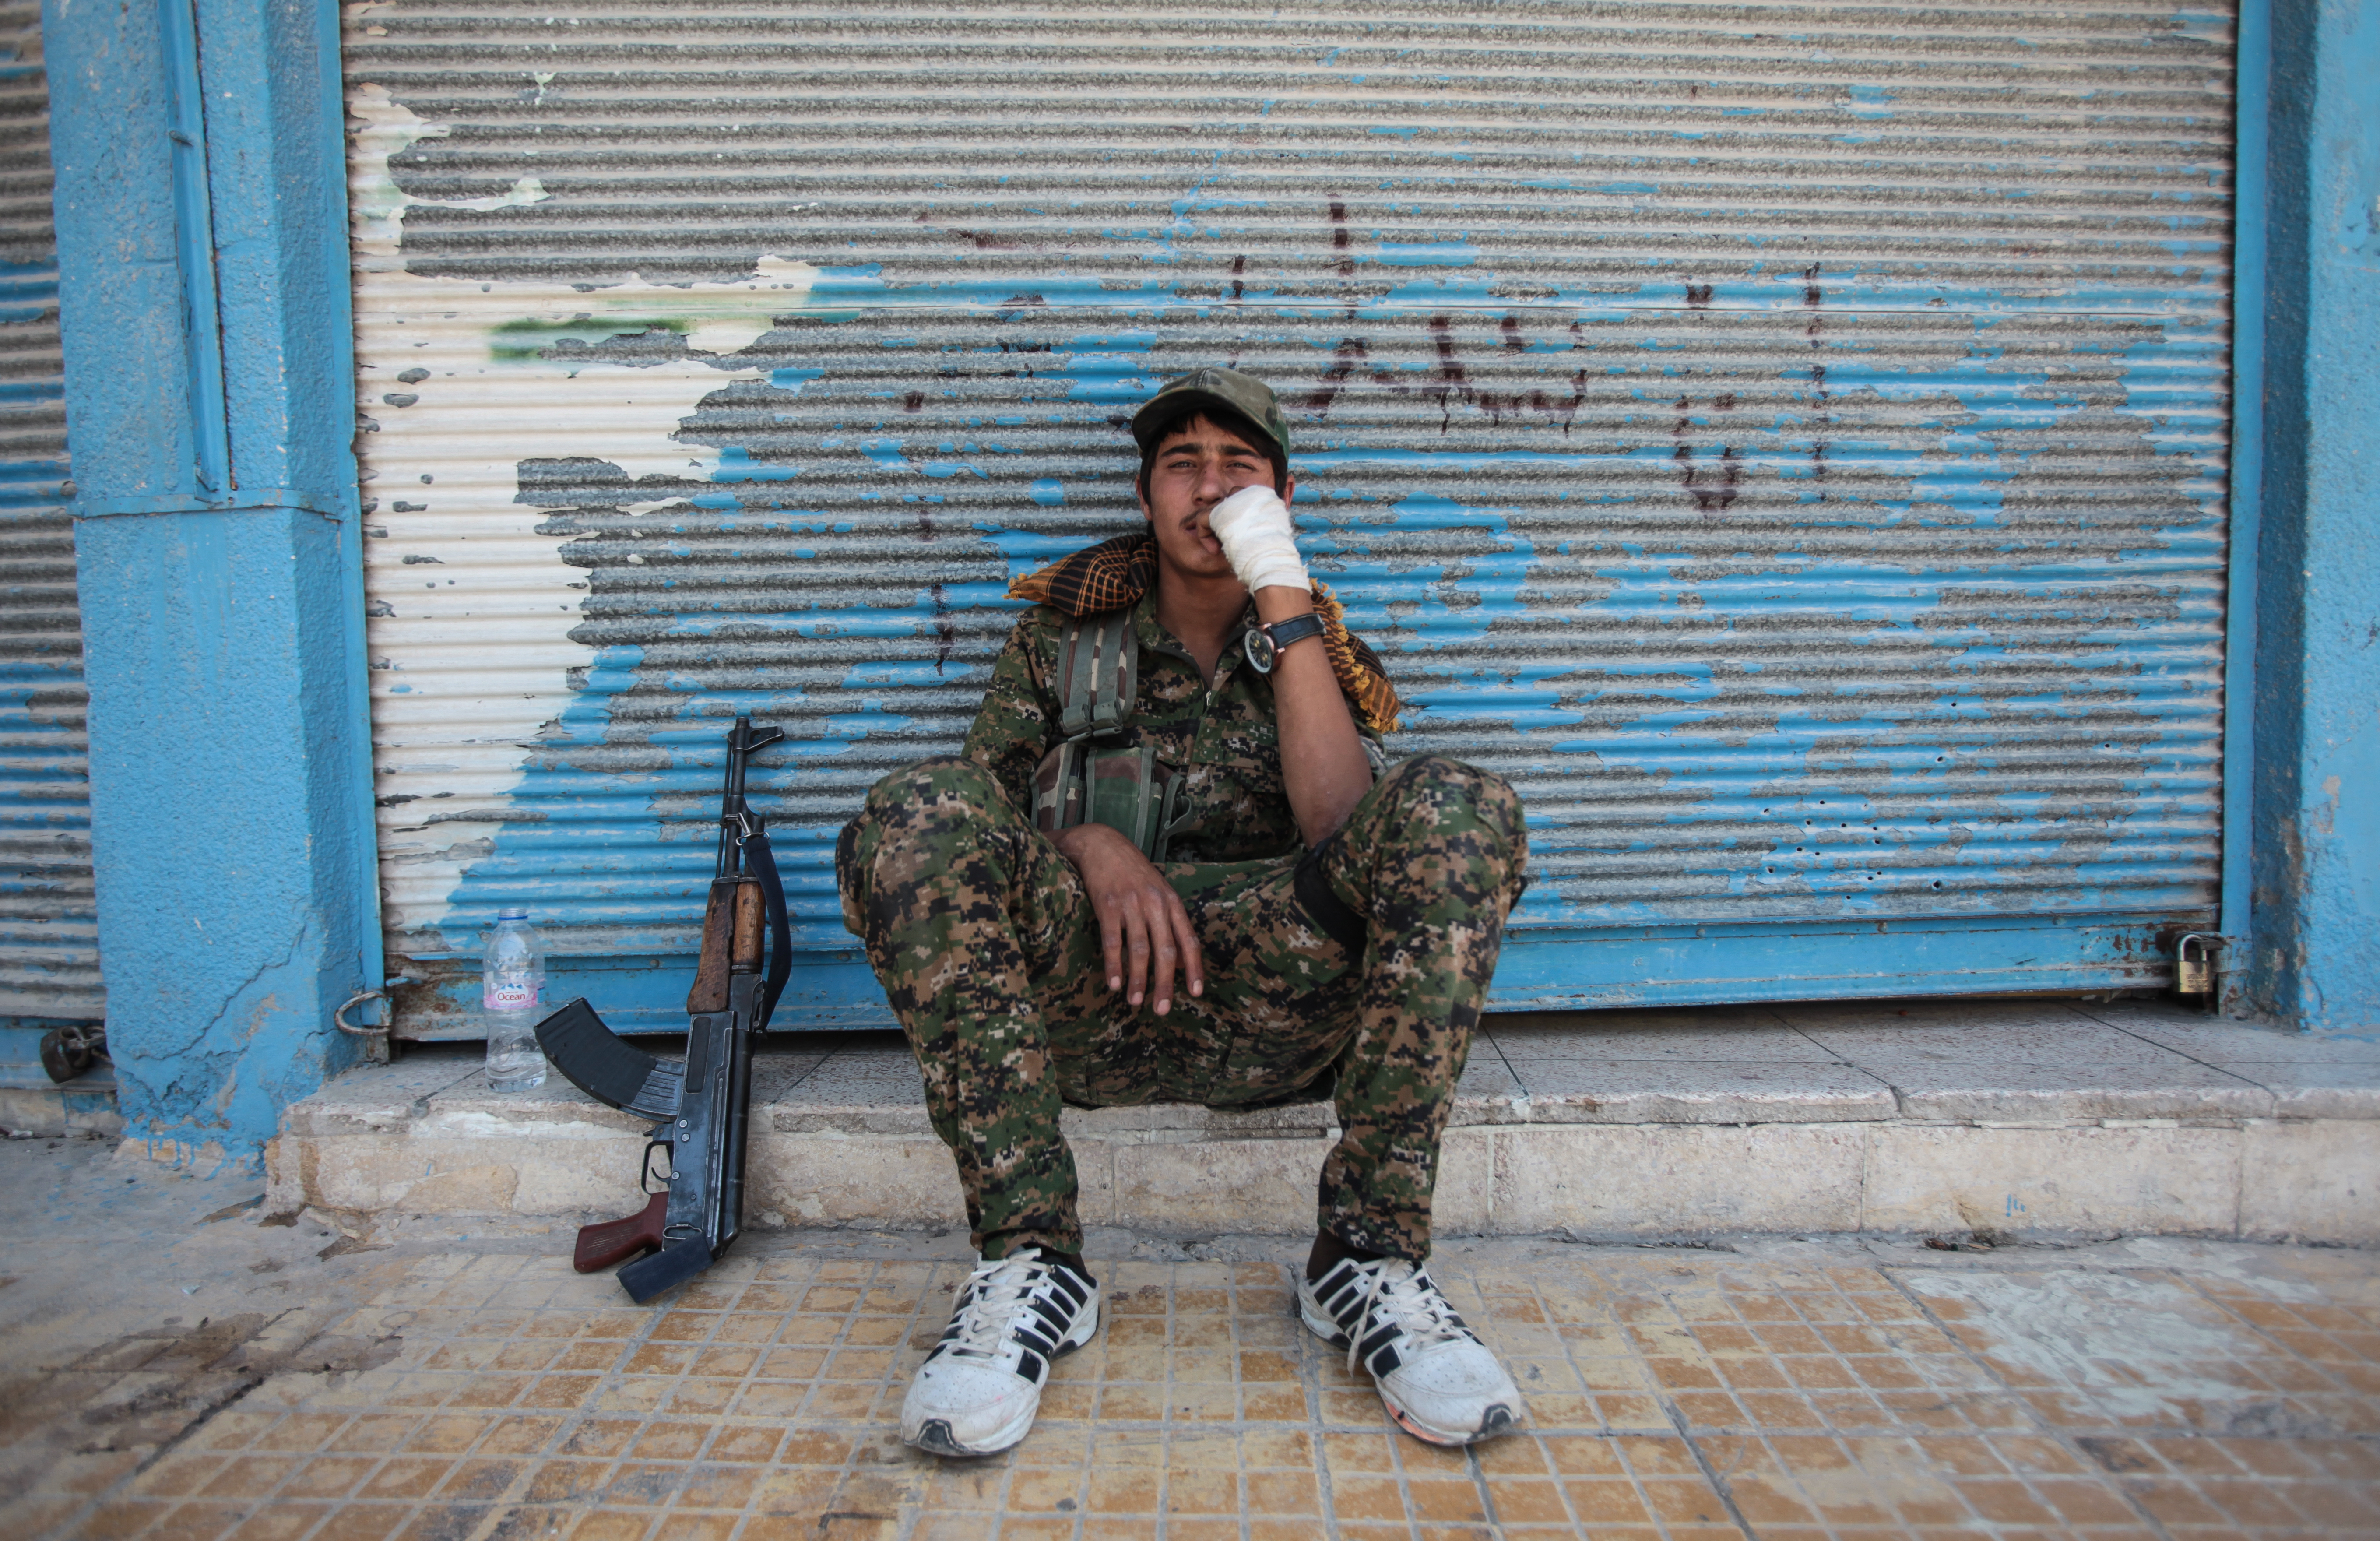 A wounded Kurdish People's Protection Units, or YPG fighters rests at downtown of Tal Abyad, Syria. June 19, 2015. Kurdish fighters with the YPG took full control of Tal Abyad, dealing a major blow to the Islamic State group's ability to wage war in Syria. Mopping up operations have started to make the town safe for the return of residents from Turkey, after more than a year of Islamic State militants holding control of the town. (Photo by Ahmet Sik/Getty Images)